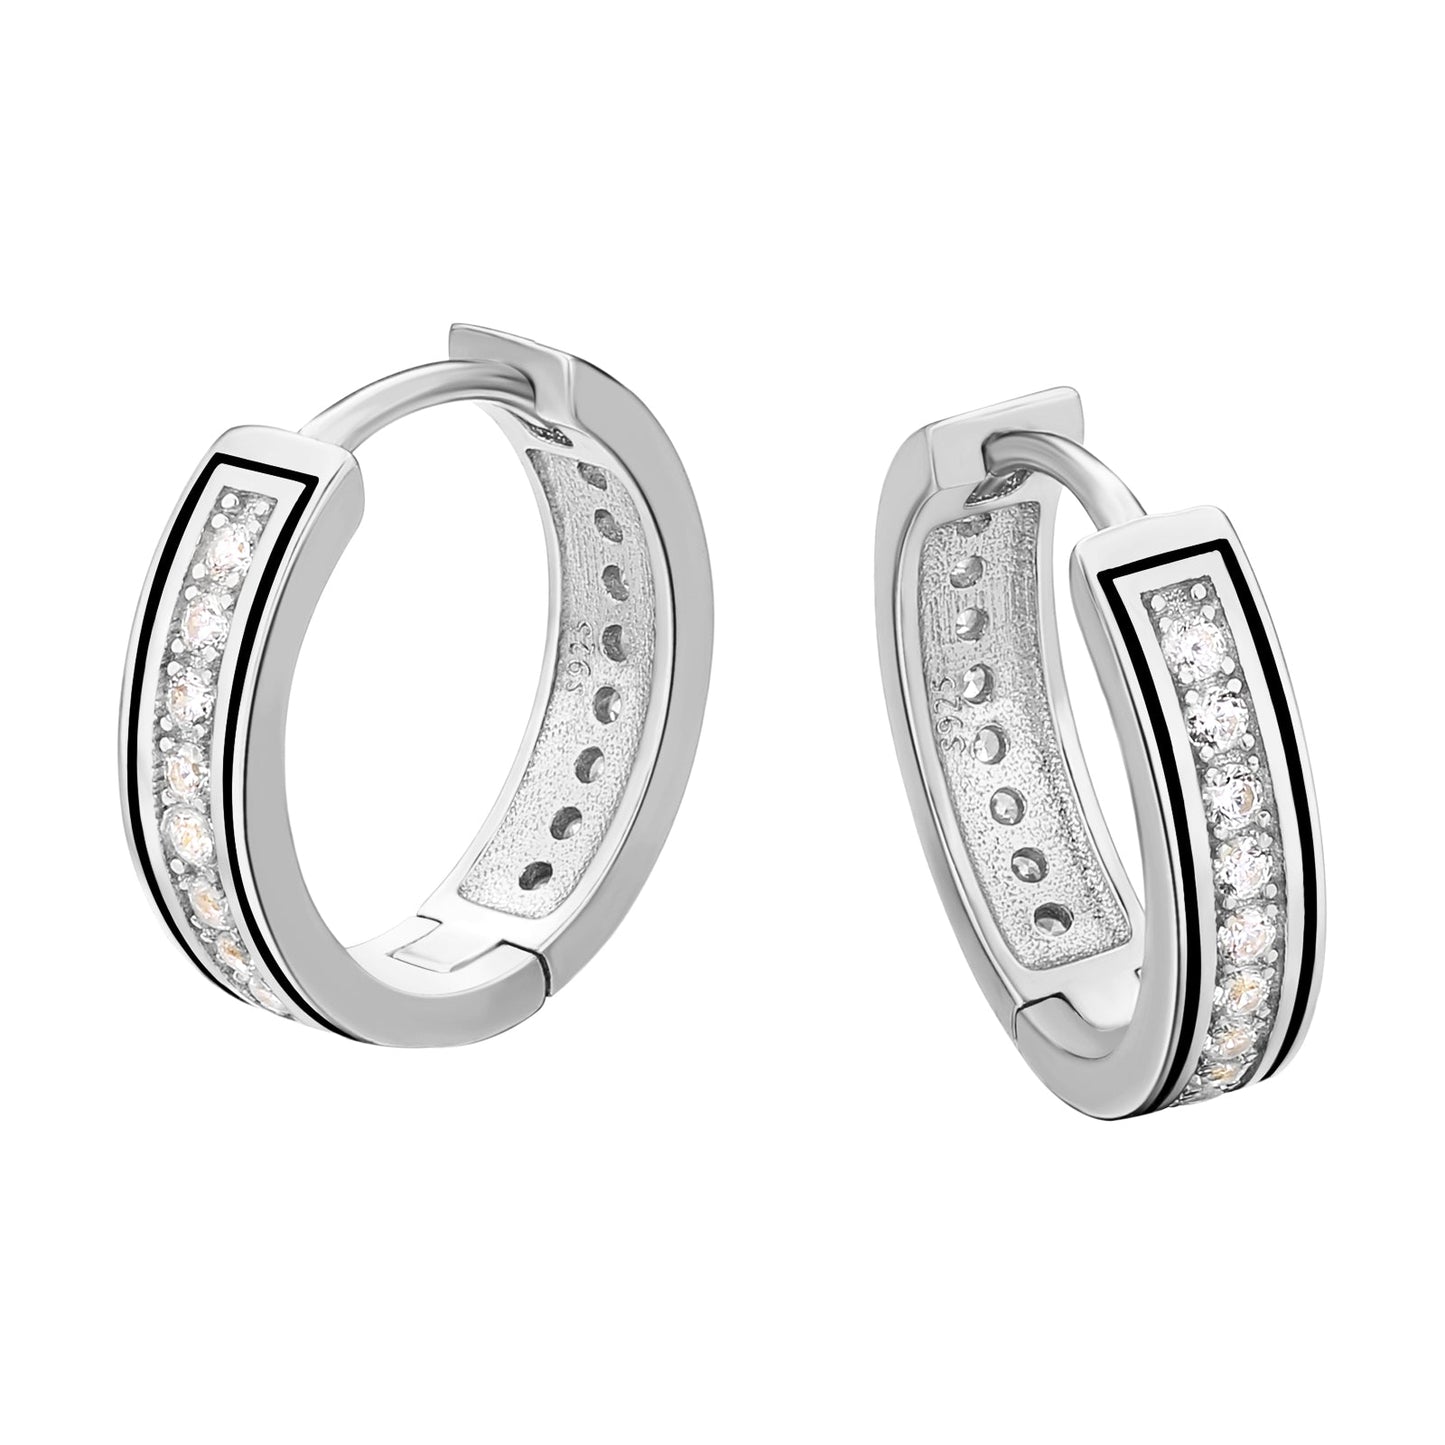 Scarabeaus 15mm Iced Out Sterling Silver Round Hoop Mens Earrings